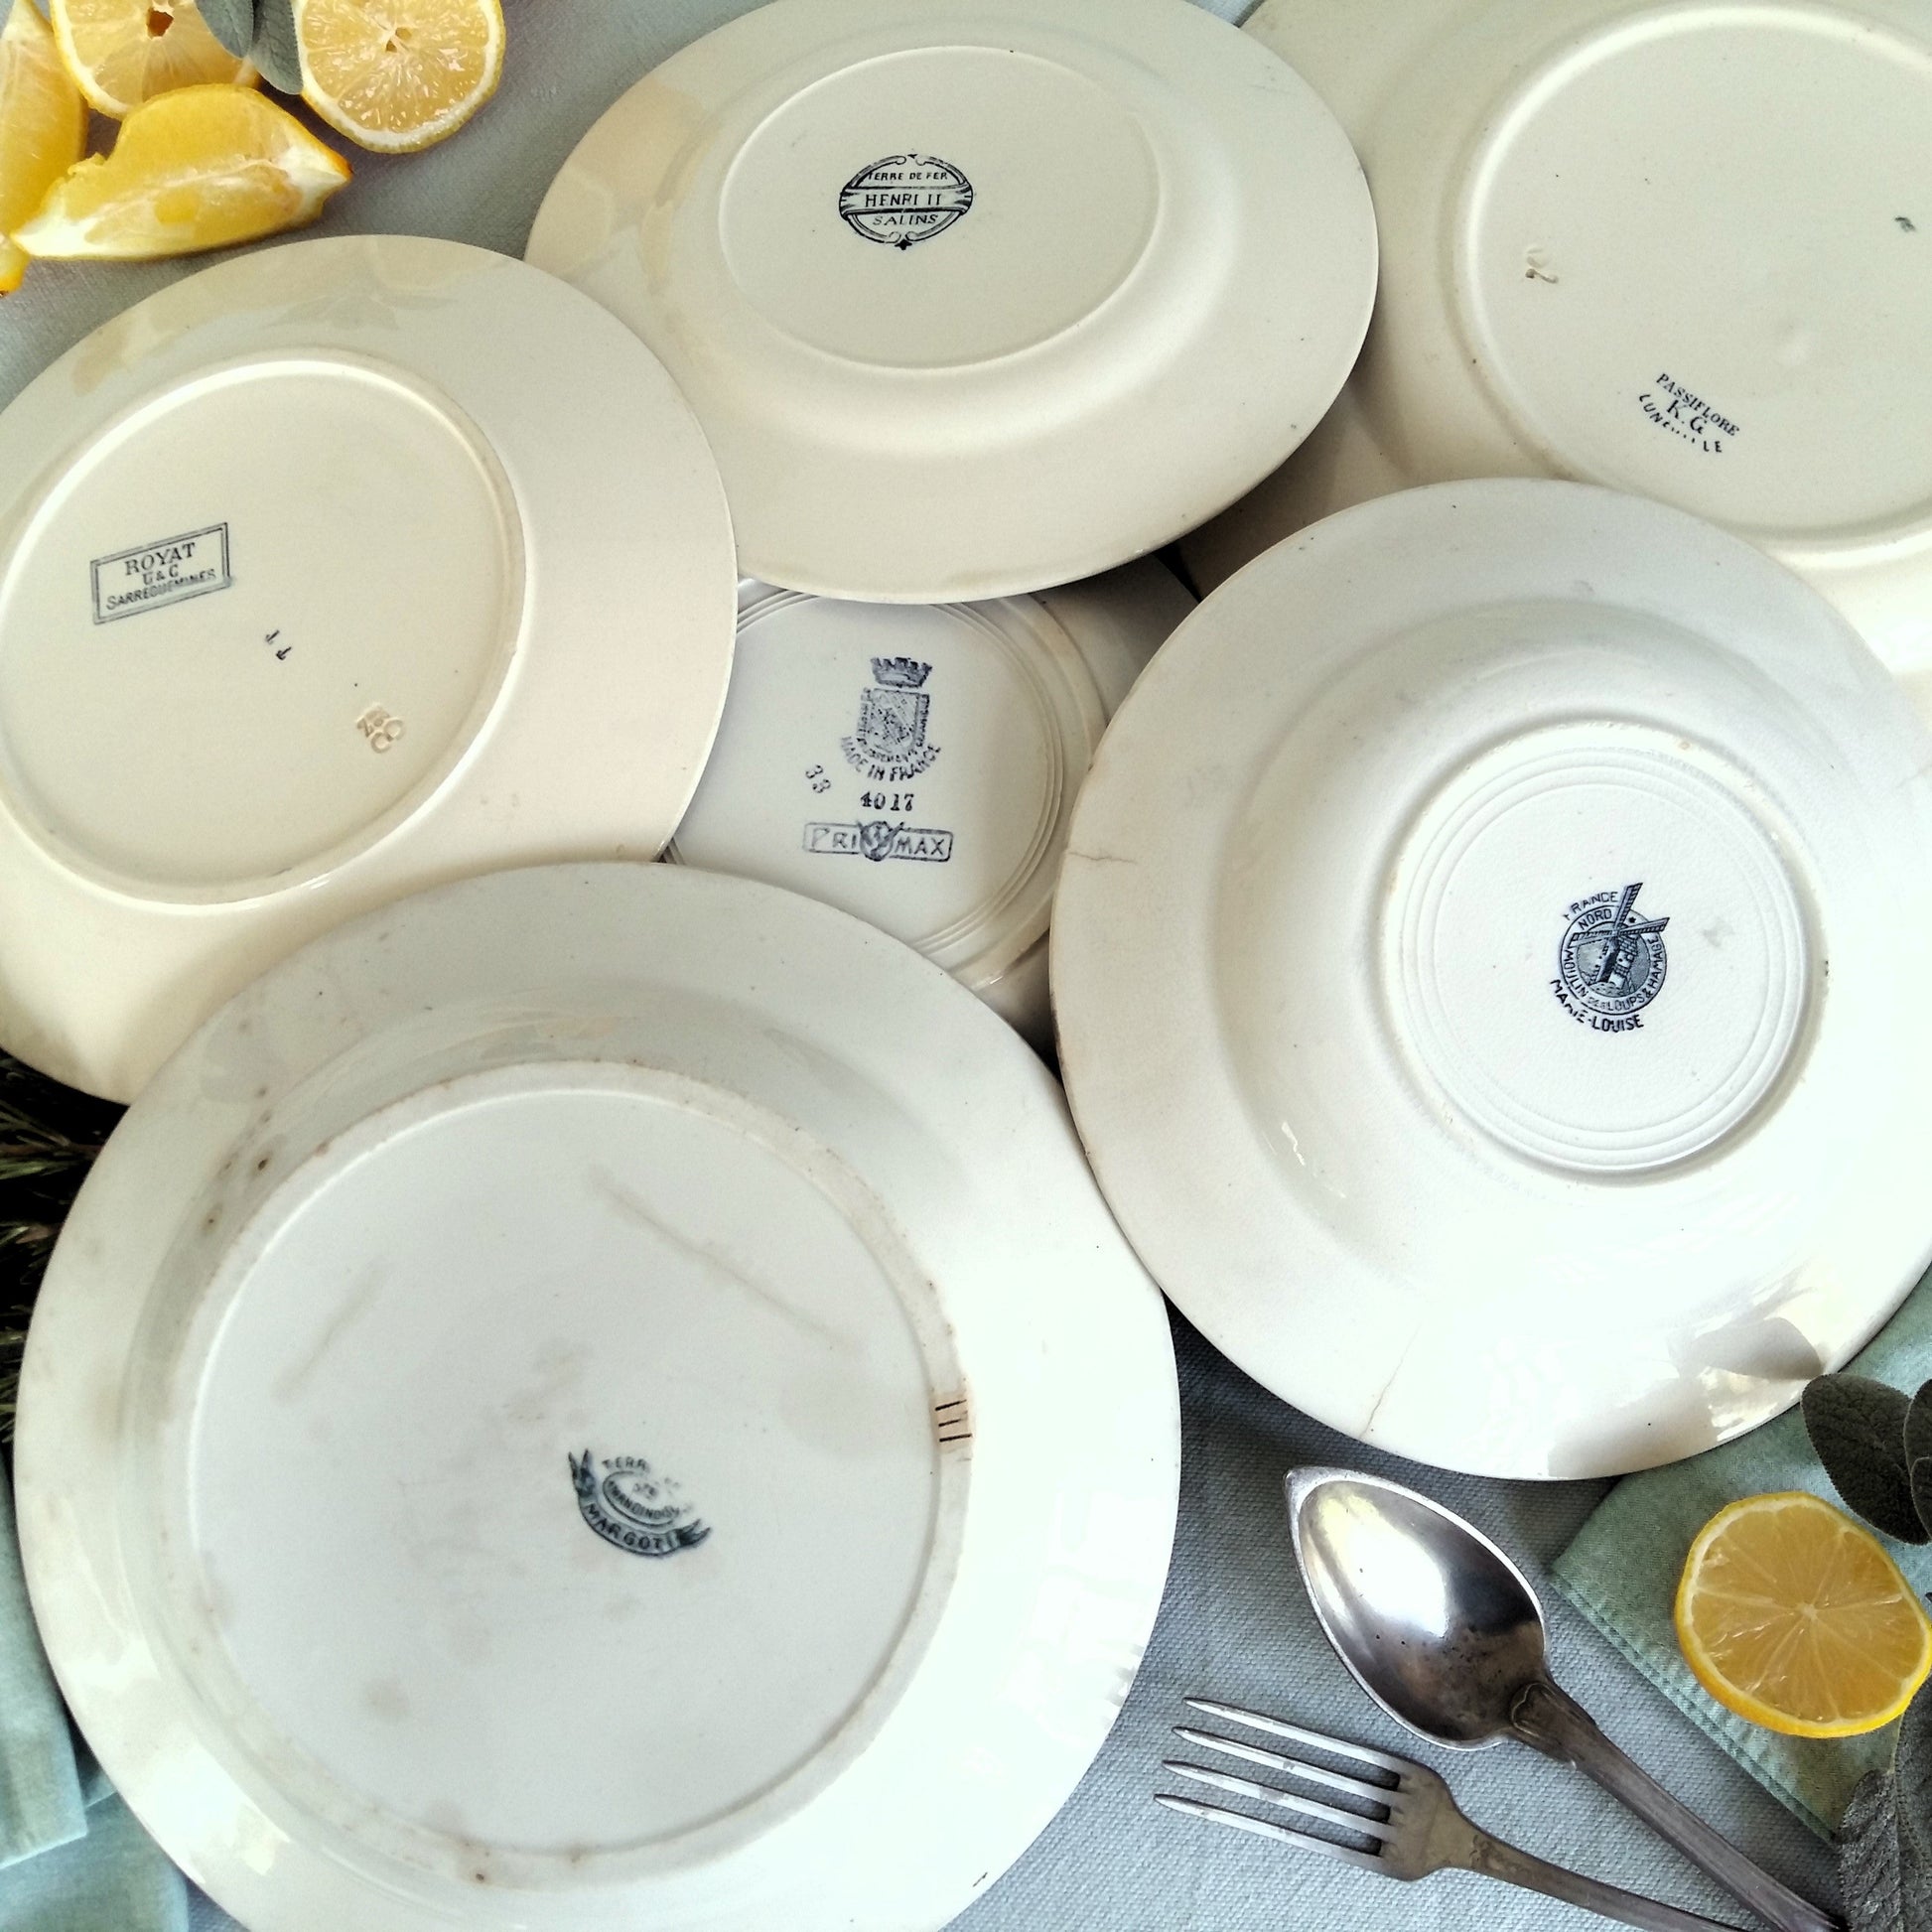 6 Antique Ironstone Transferware Plates from Tiggy & Pip - Just €216! Shop now at Tiggy and Pip